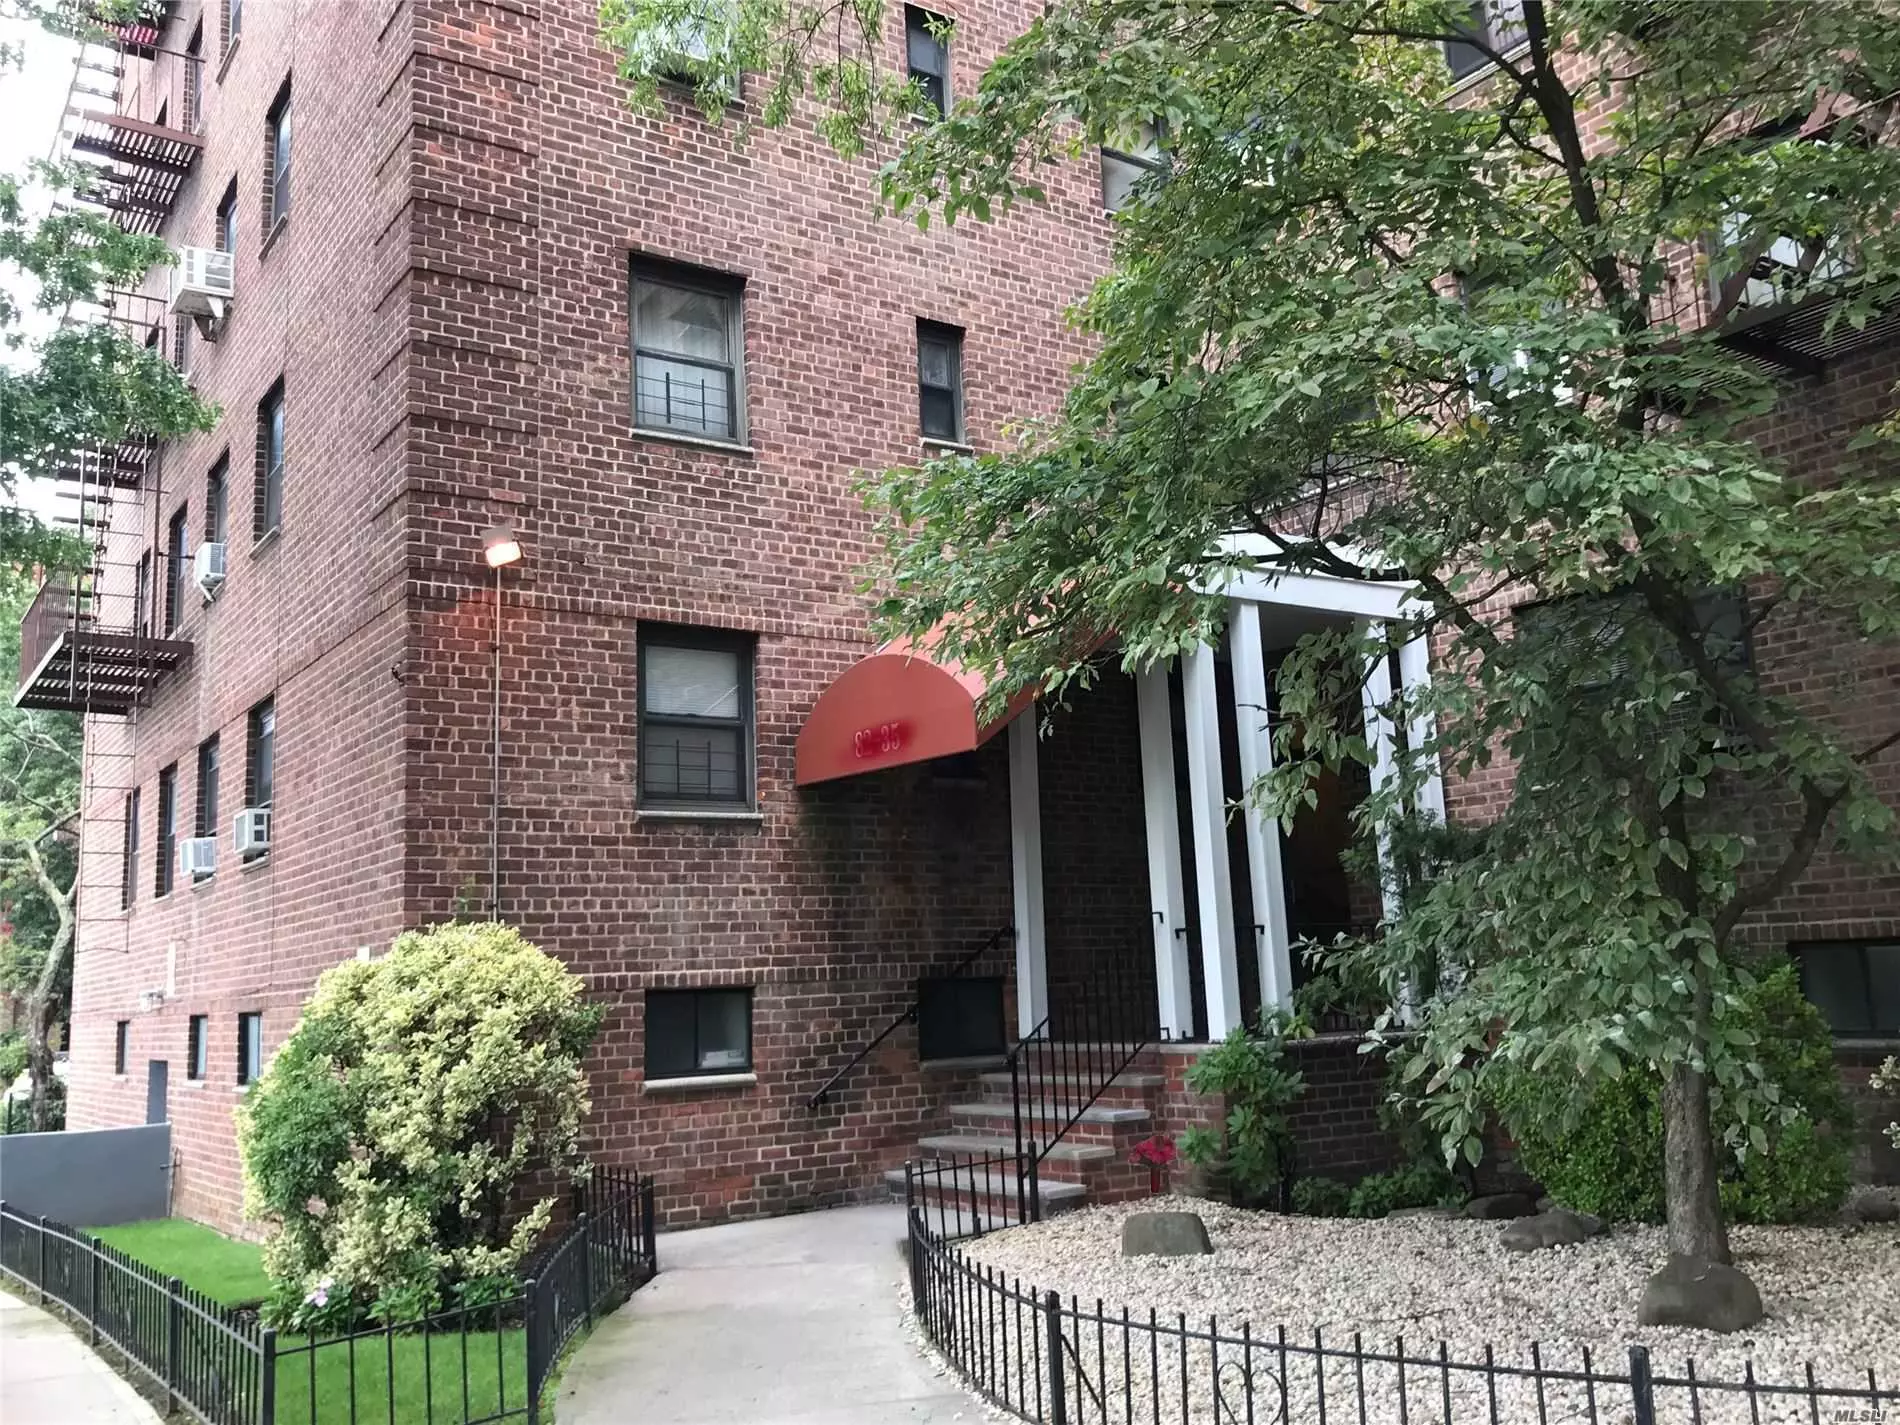 One Bedroom Co-op! Convenient Location! Queens Blvd, Shopping! Restaurants! Major Highways! Multiple-Express Bus to NYC! Minutes to Subway! Multiple-Bus Services!